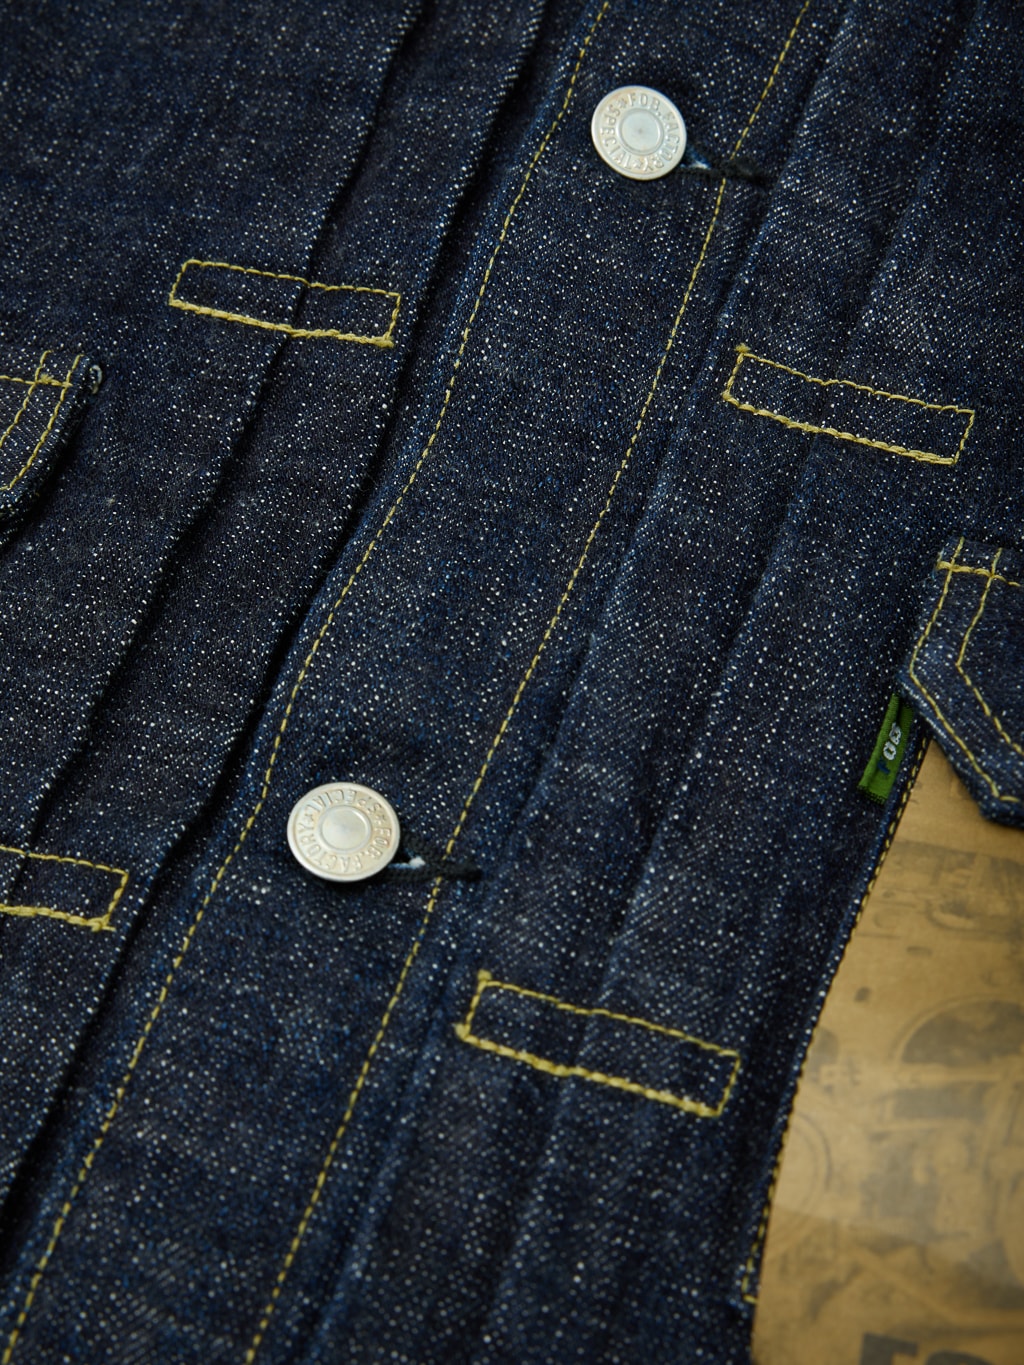 Fob factory Type III denim jacket selvedge authentic chain stitching